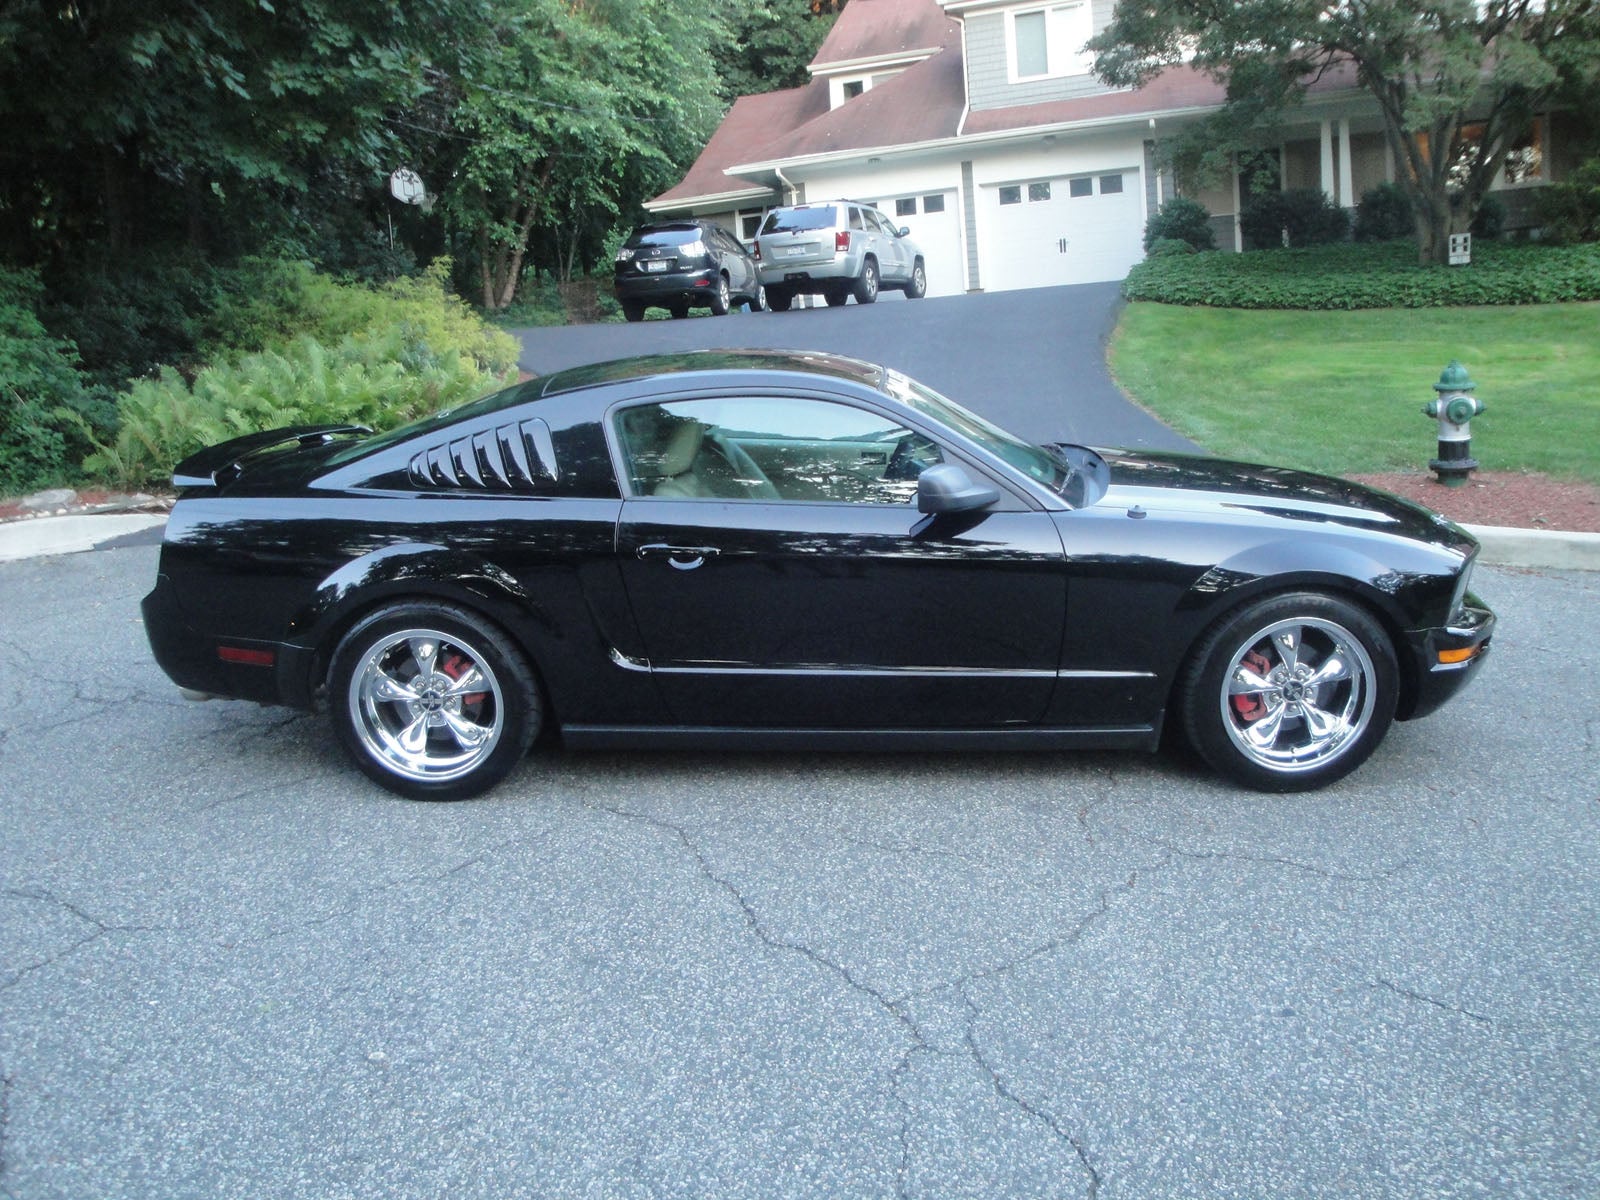 2005 Ford mustang sale new york #5